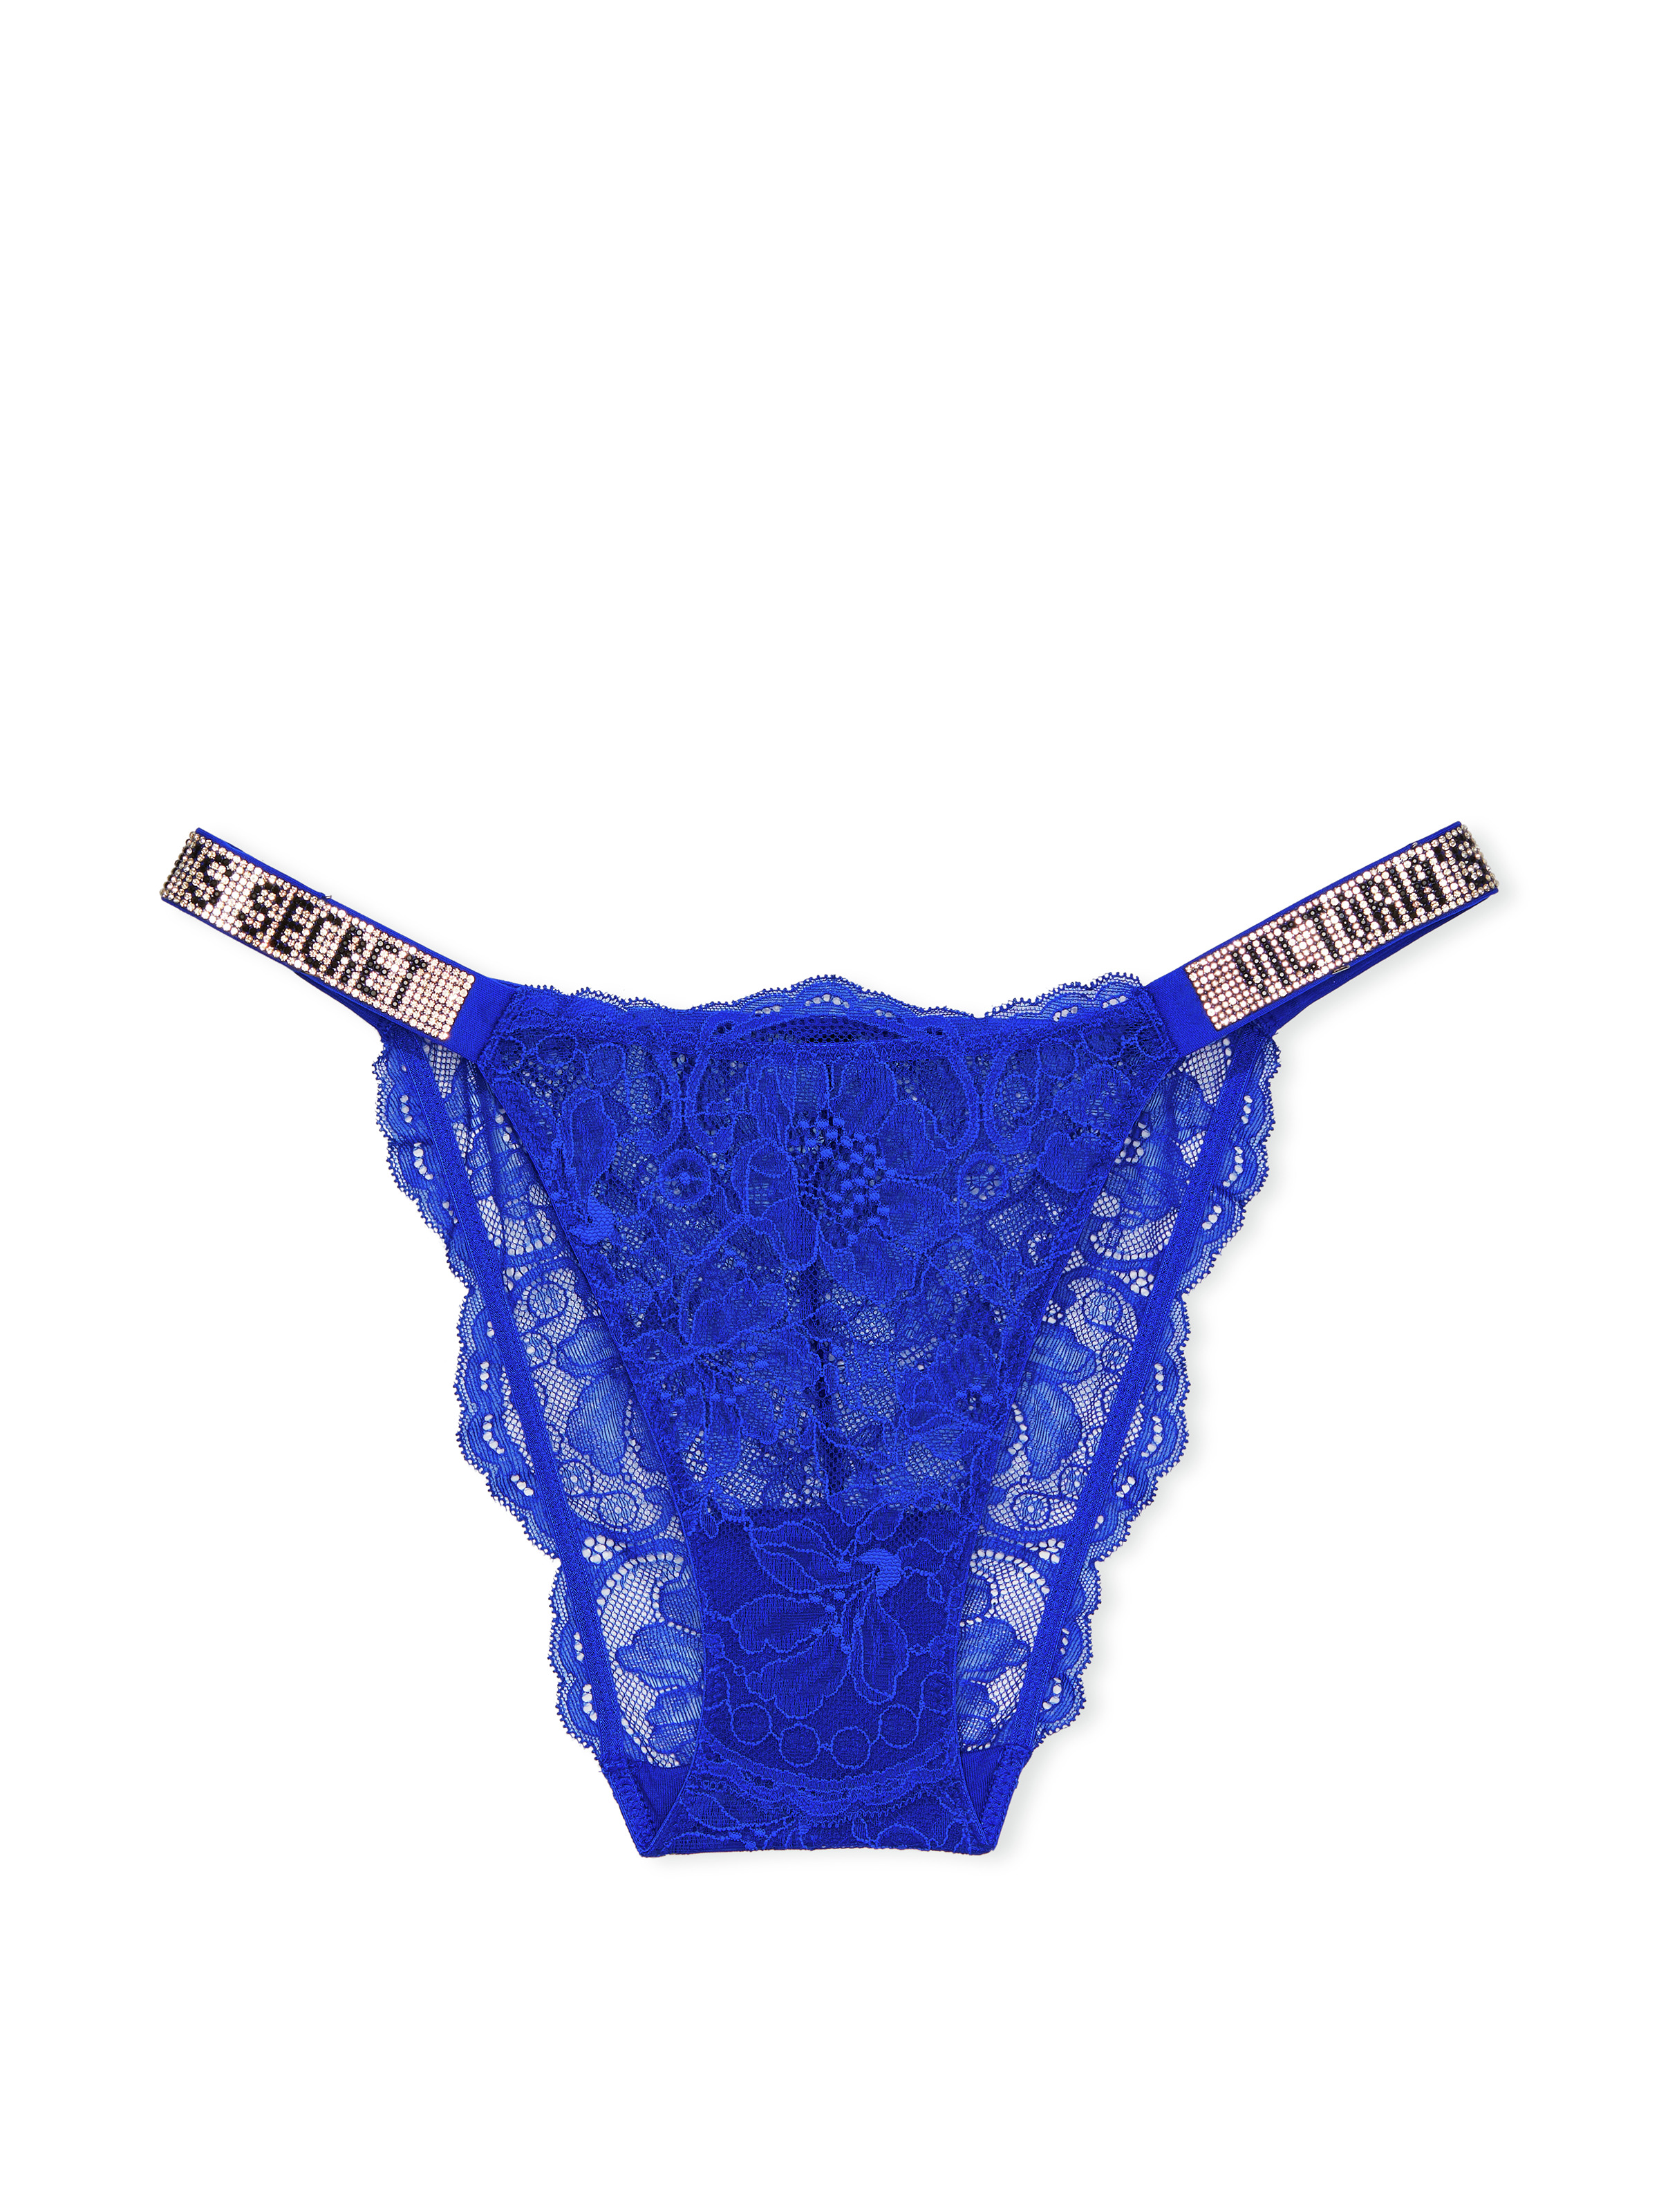 Victoria's Secret Angel panty lace embroidery thong cheeky garter blue  Jewels